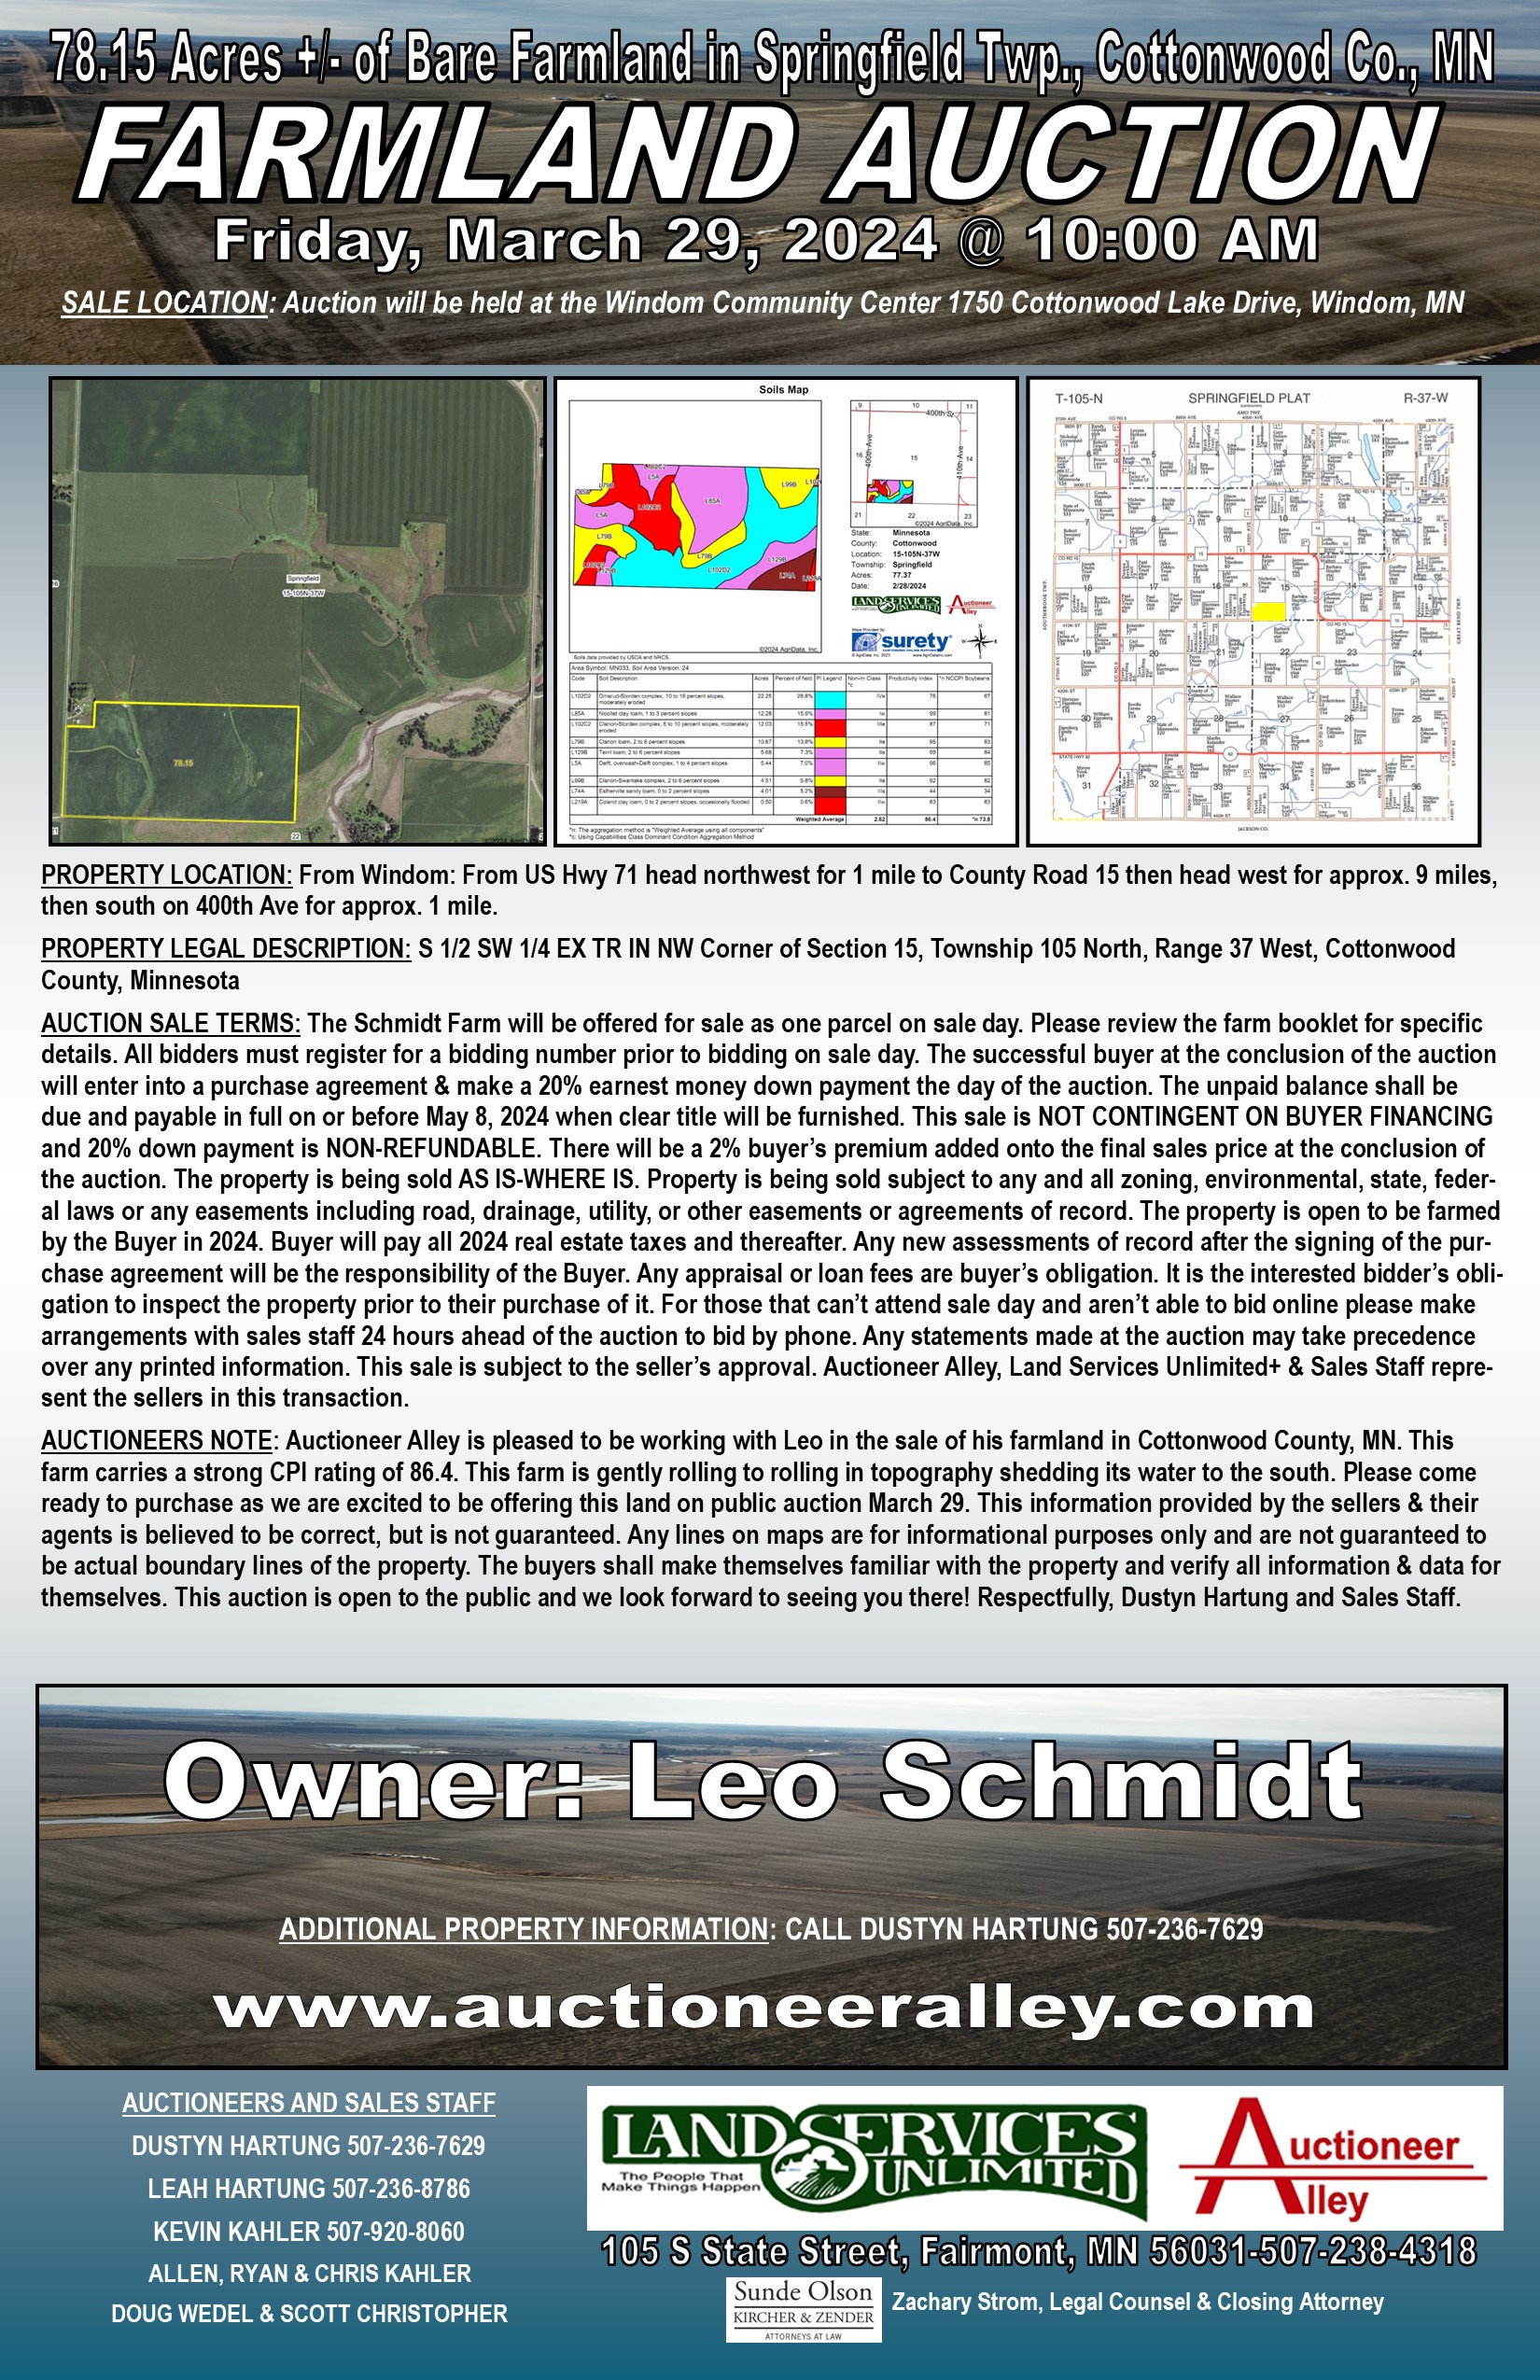 Upcoming Auctions - Land Services Unlimited